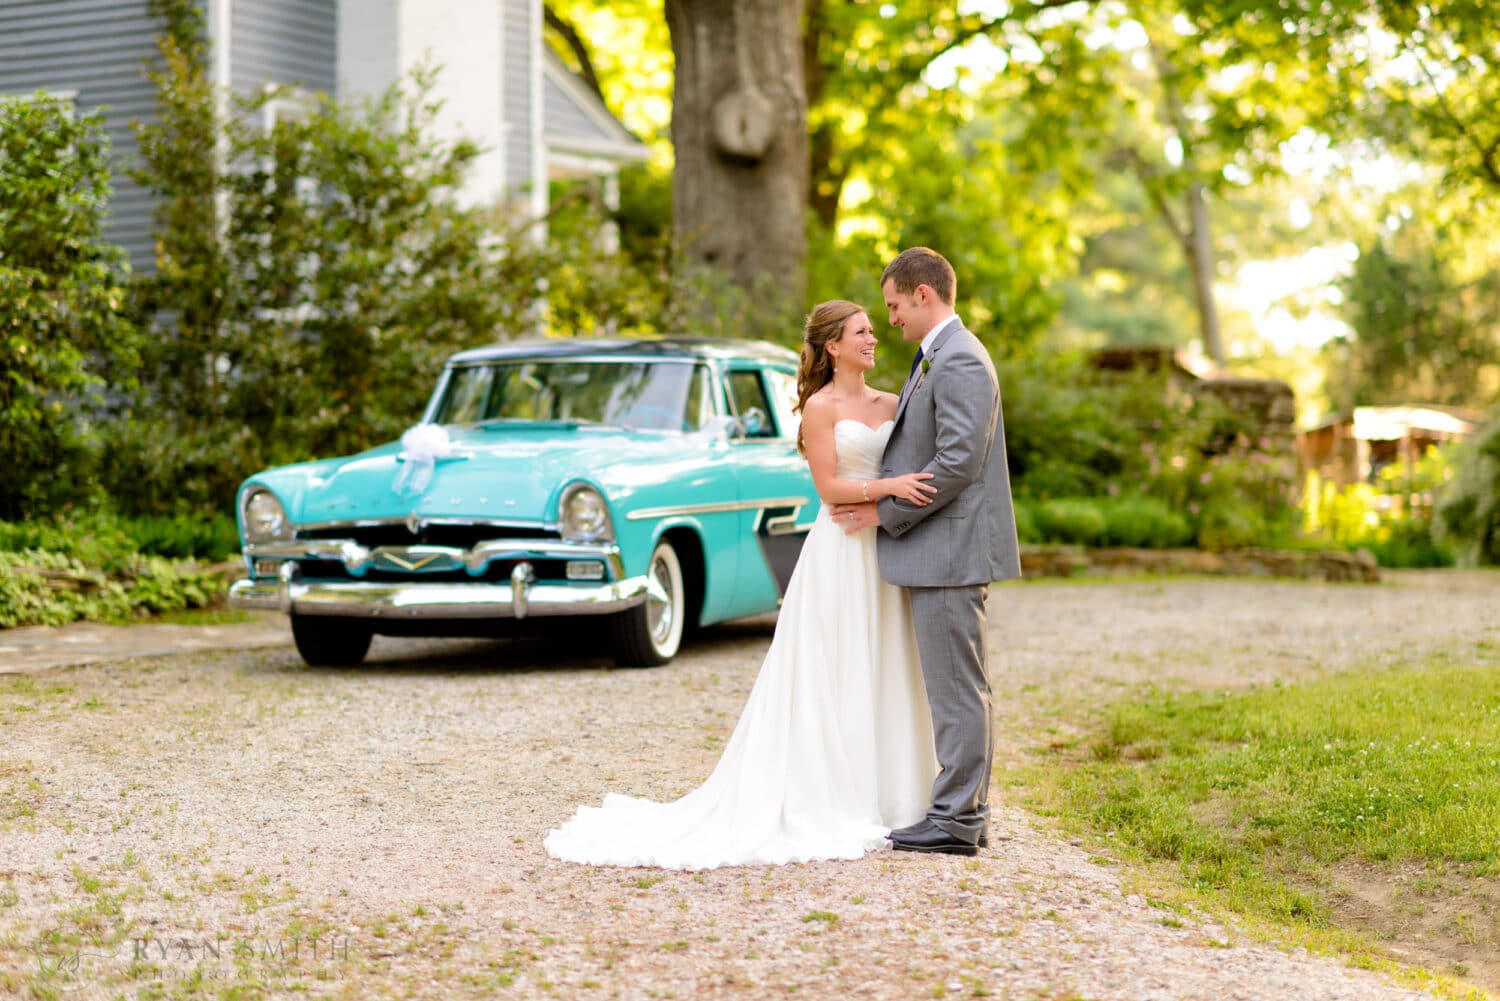 Wedding couple standing in front of a classic car - The Ivy Place